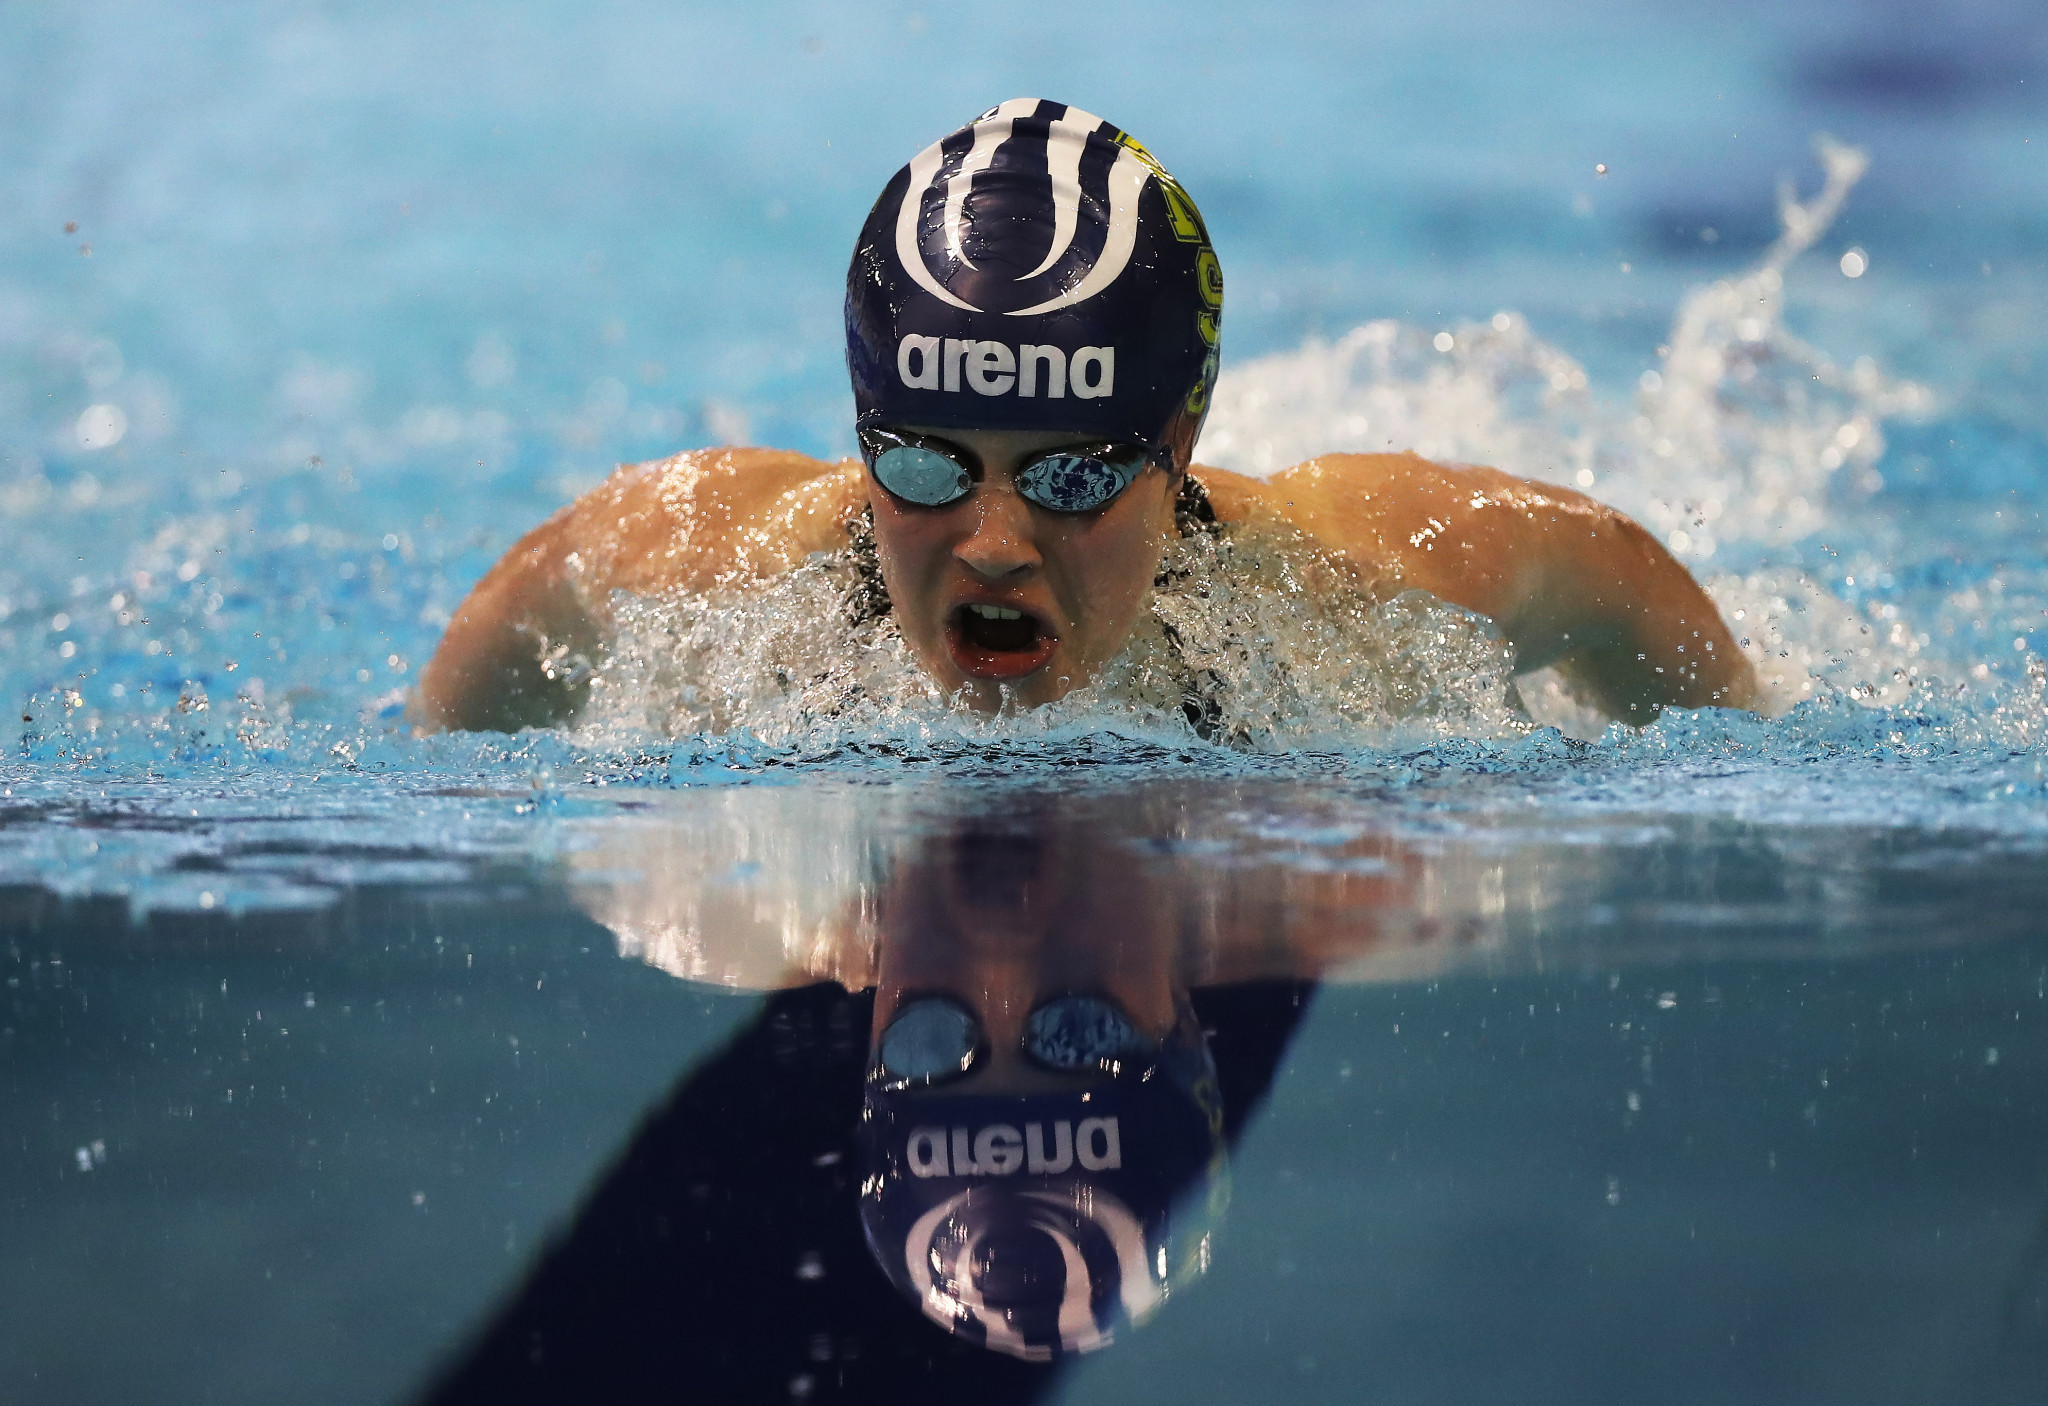 Robinson impresses on opening day of World Para Swimming World Series